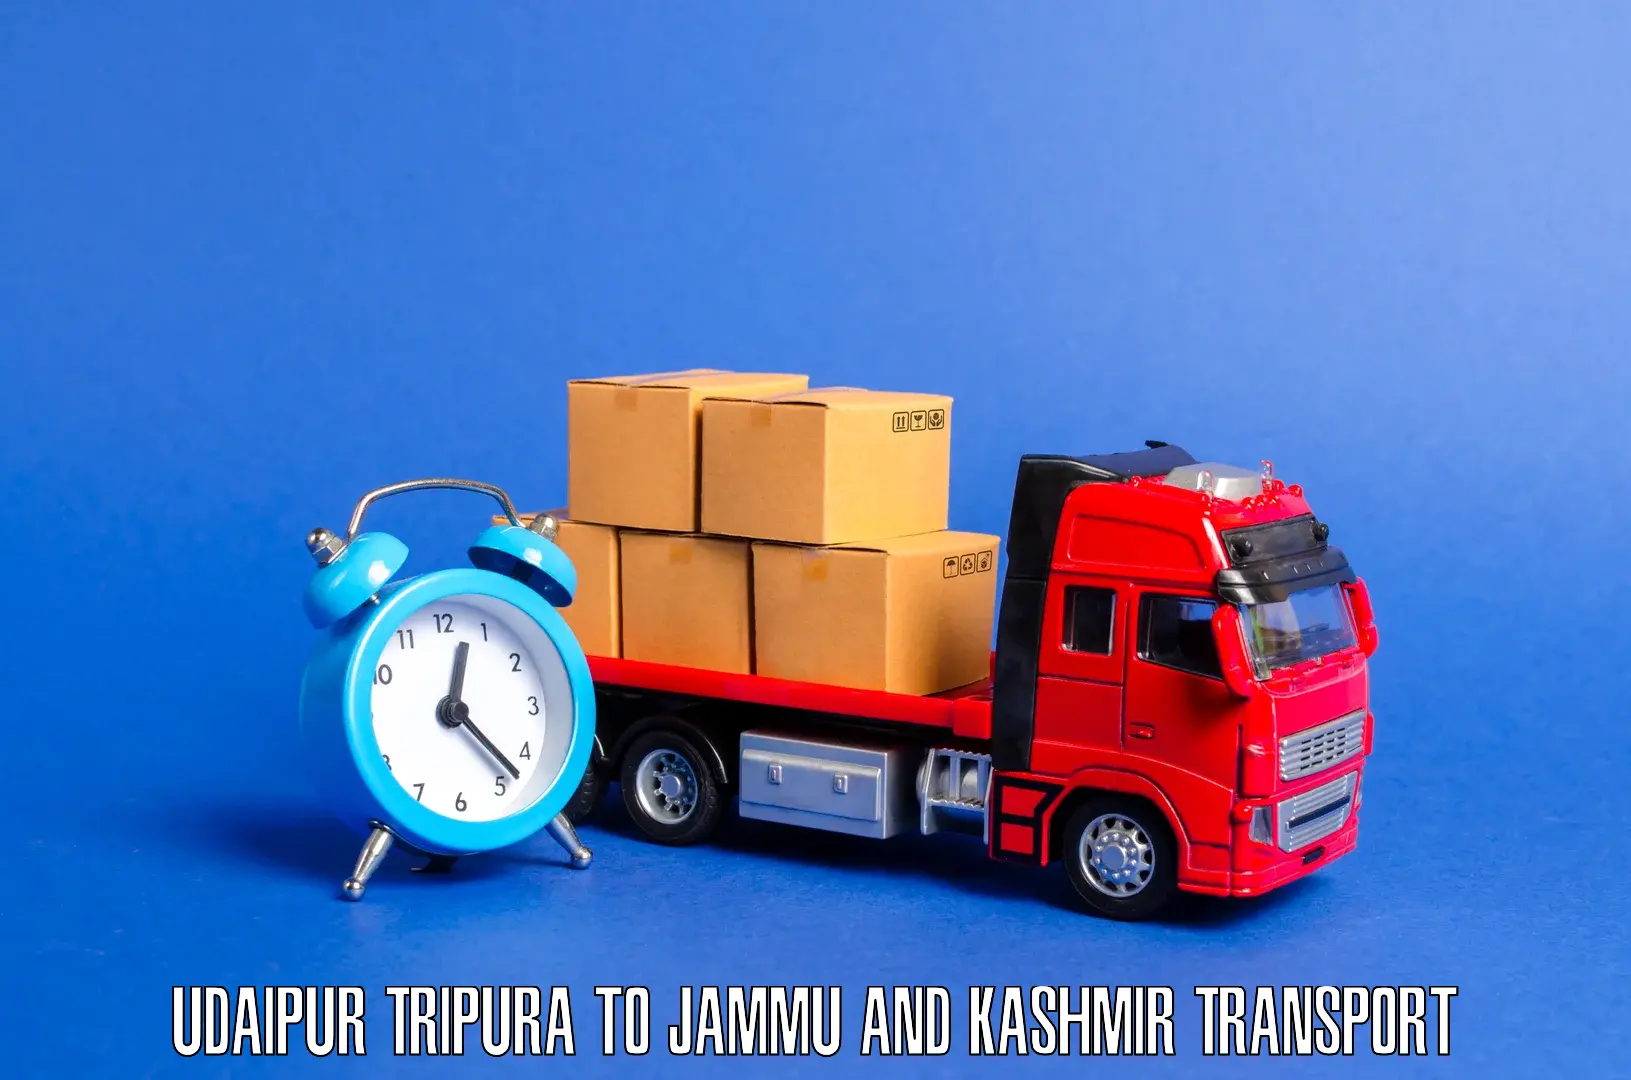 Cargo transport services in Udaipur Tripura to Bandipur